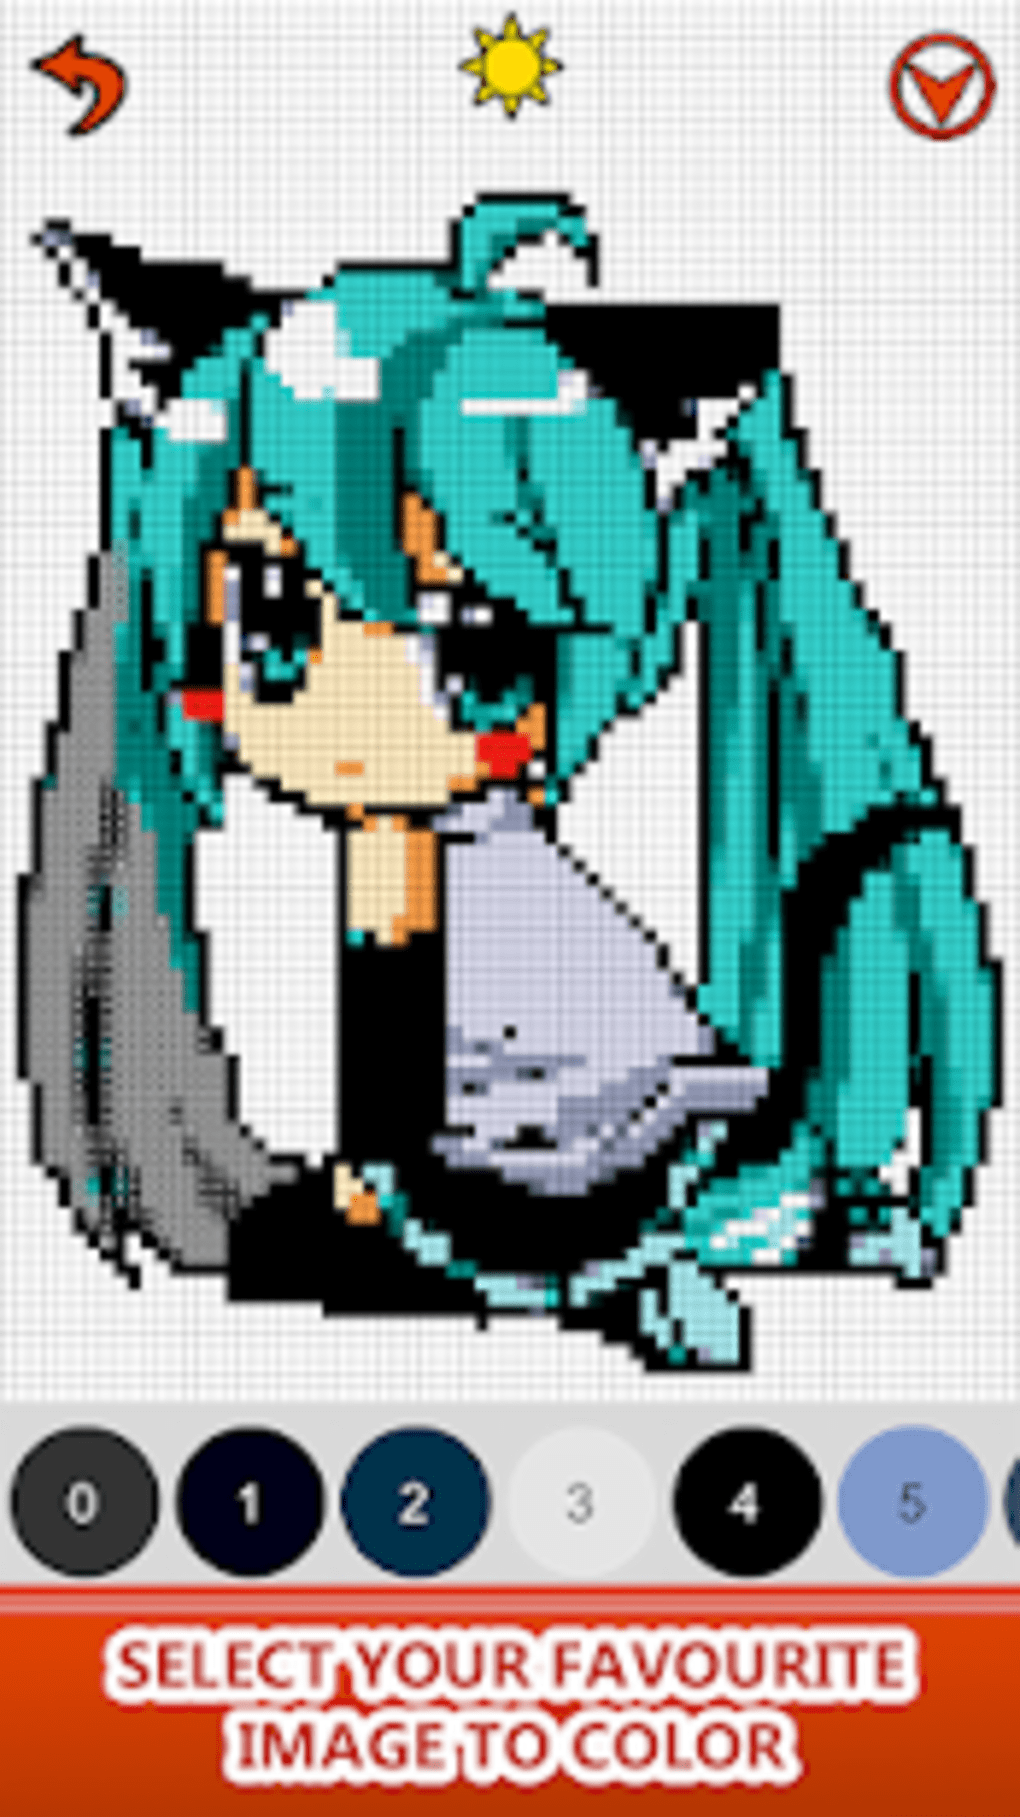 App Insights: ANIME Pixel Art, ANIME Color By Number